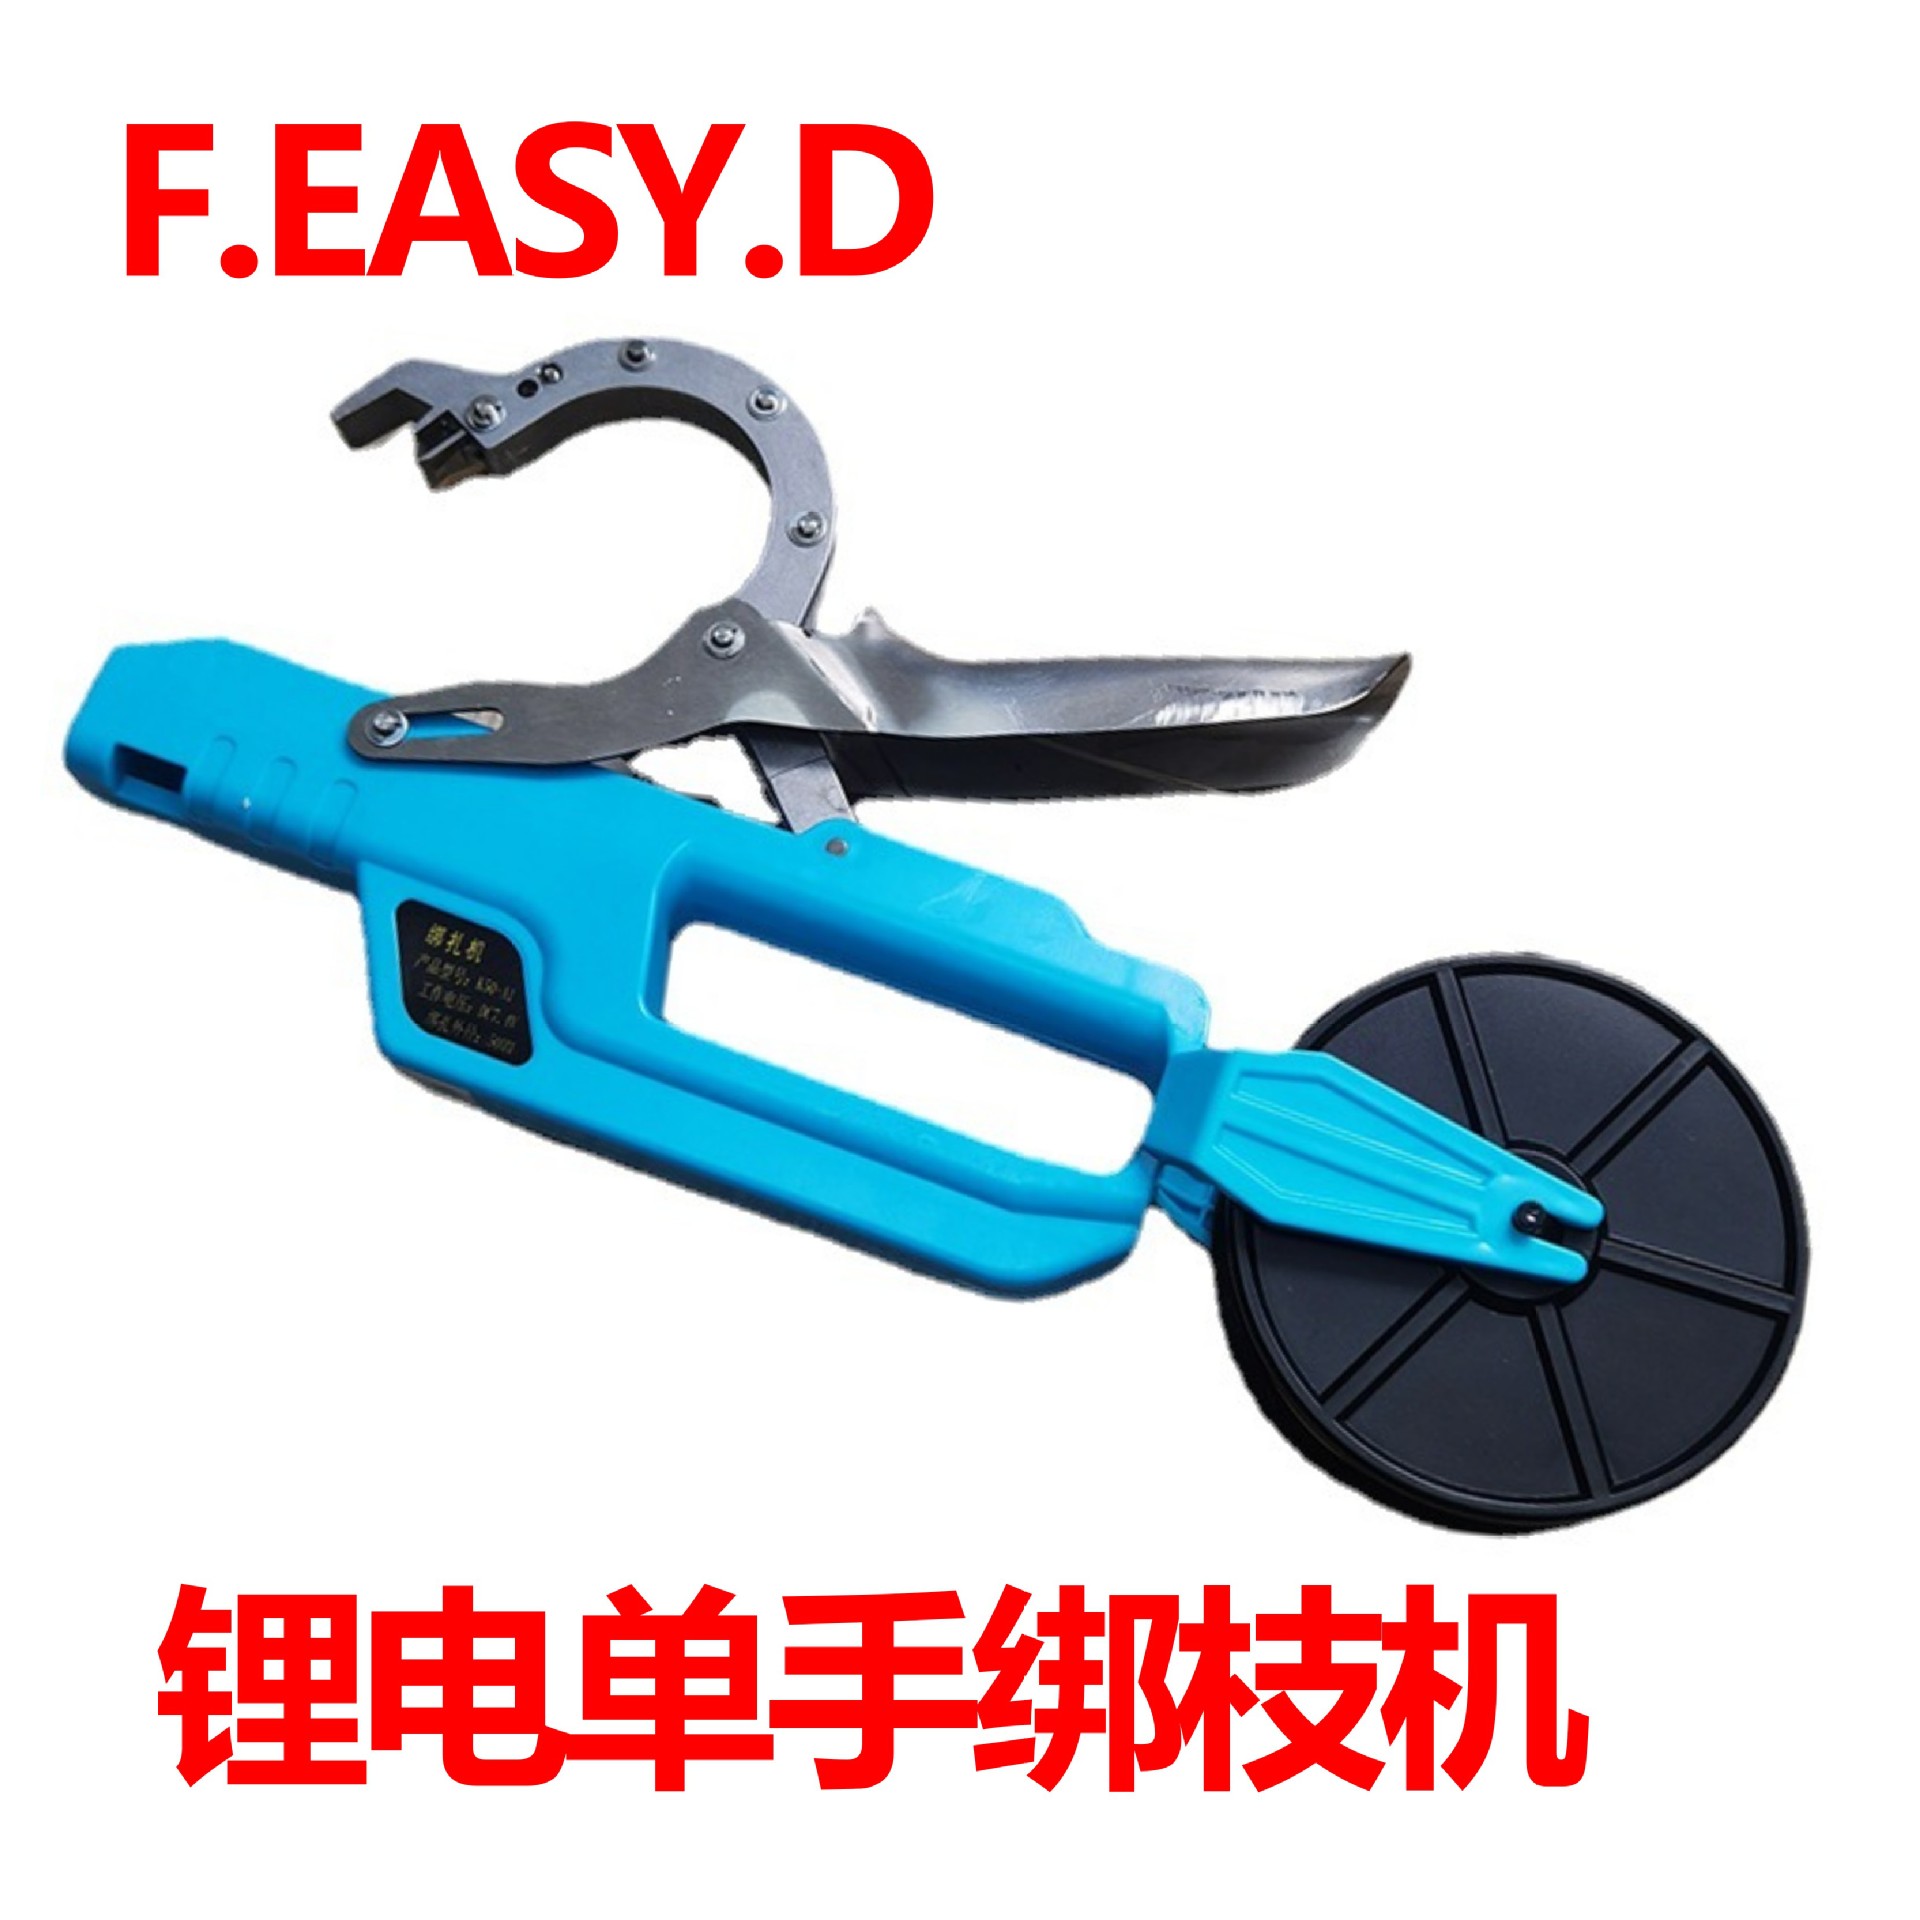 Lithium Battery Single-Hand Branch Binding Machine Wireless Electric Binding Machine Rechargeable Fast Binding Vegetables Vine Crops